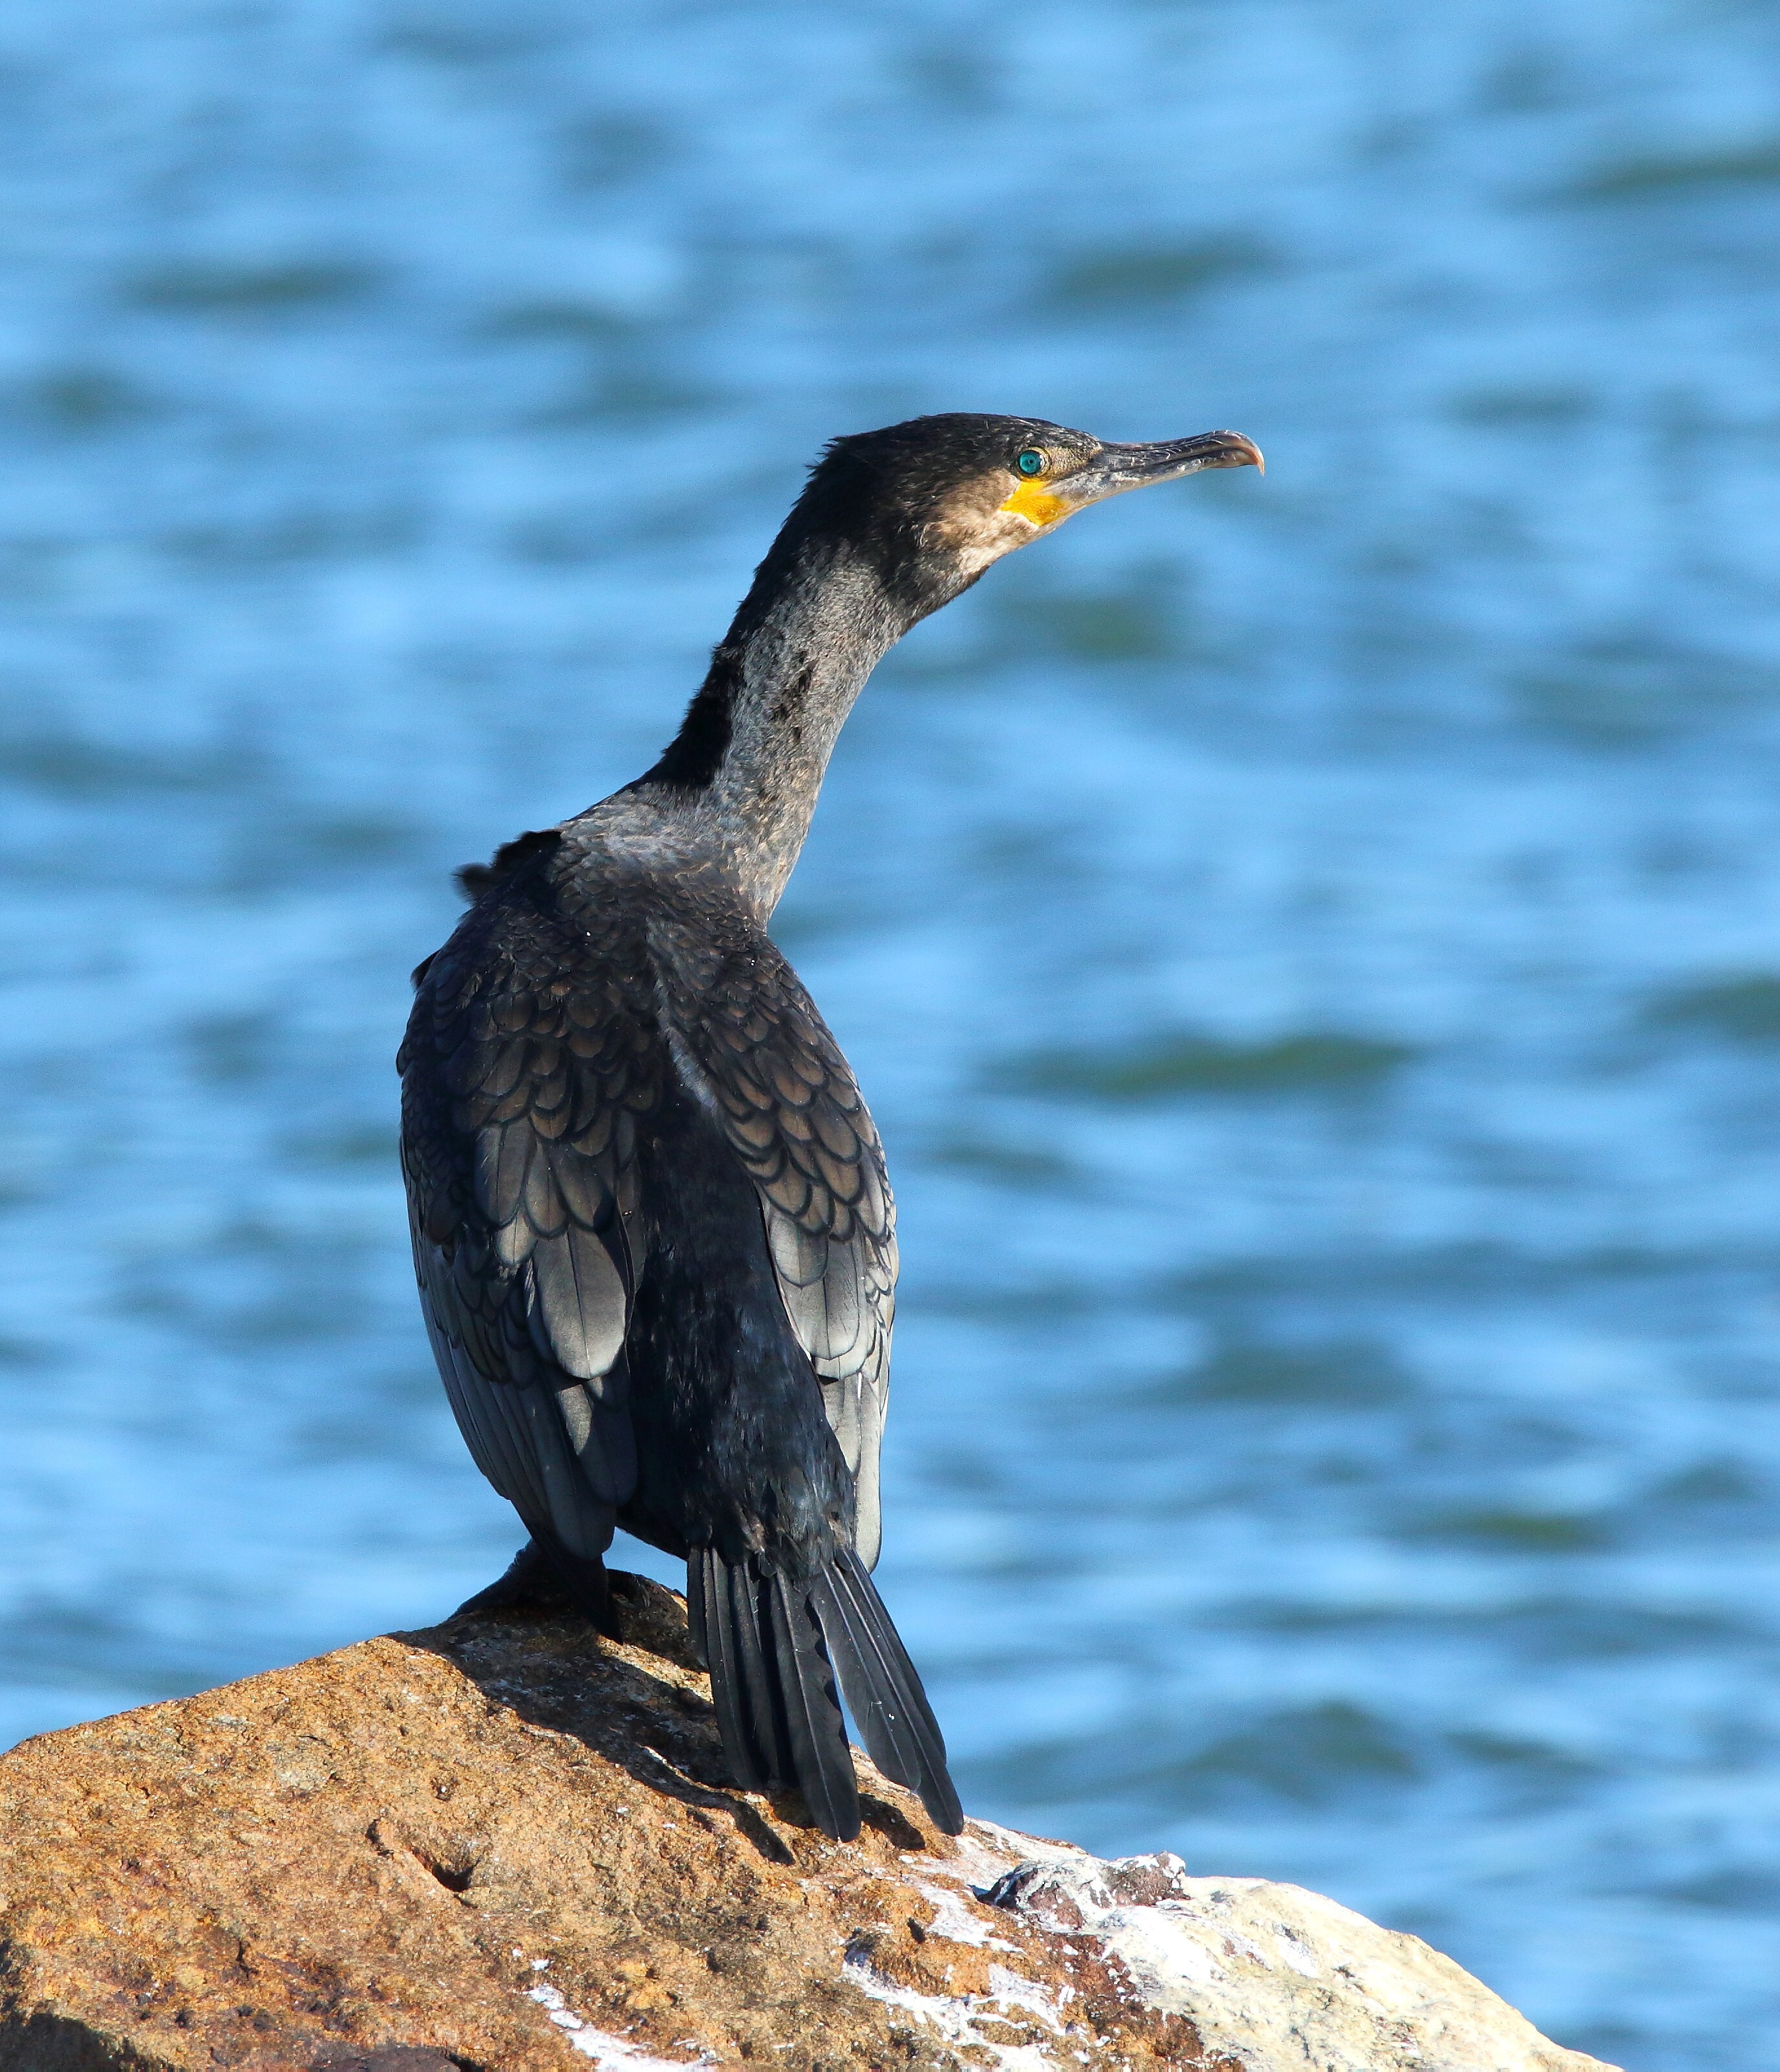 Fort Wadsworth is a good spot for wintering Great Cormorant. Photo: <a href="https://www.flickr.com/photos/120553232@N02/" target="_blank" >Isaac Grant</a>